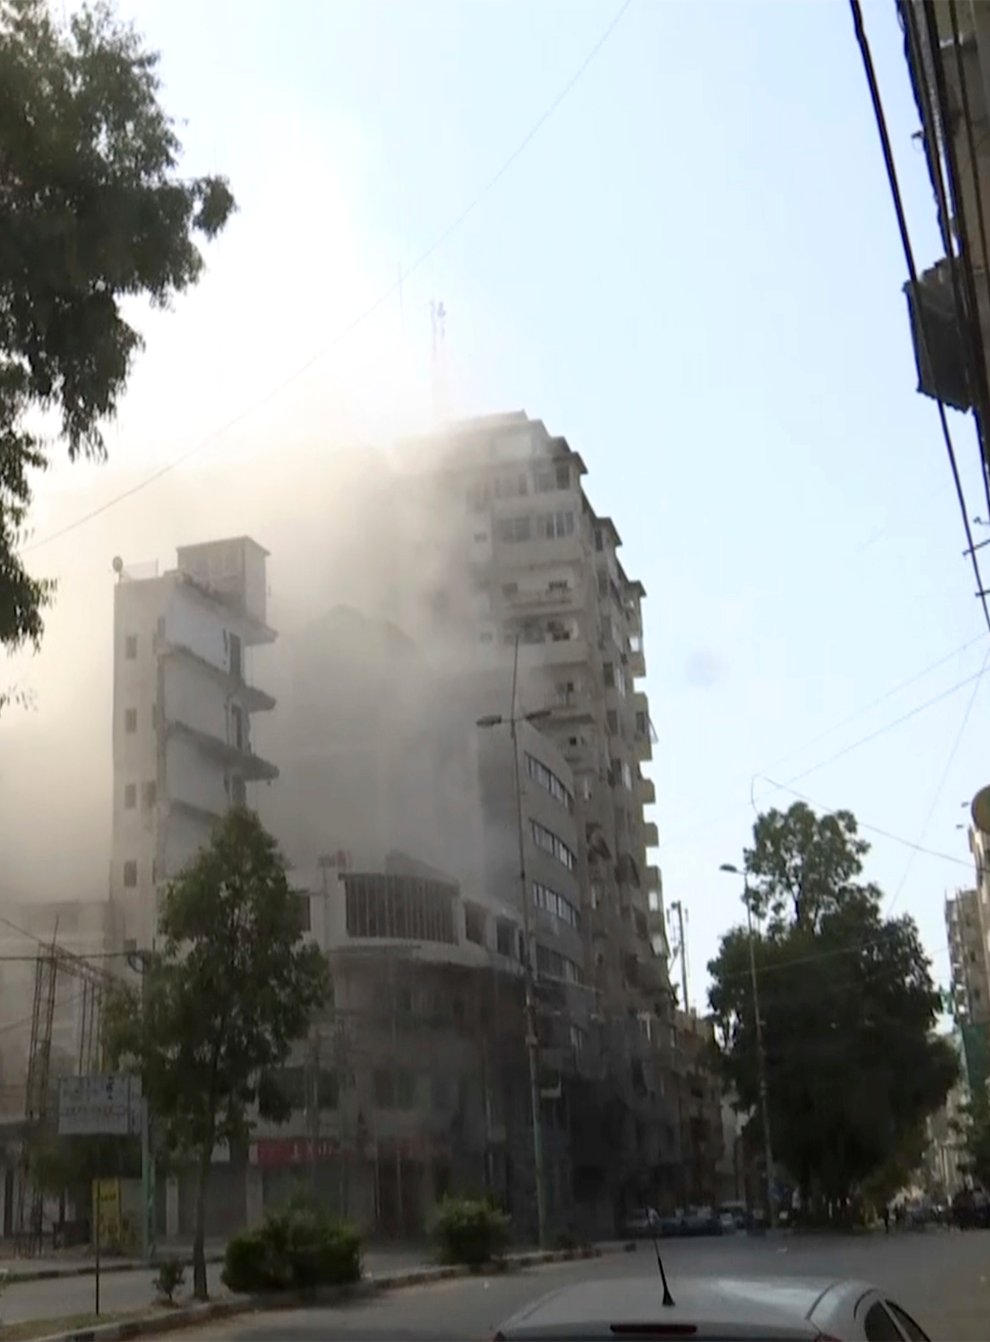 Smoke pours out of a tall building after an Israeli air strikes in Gaza City (AP Photo)